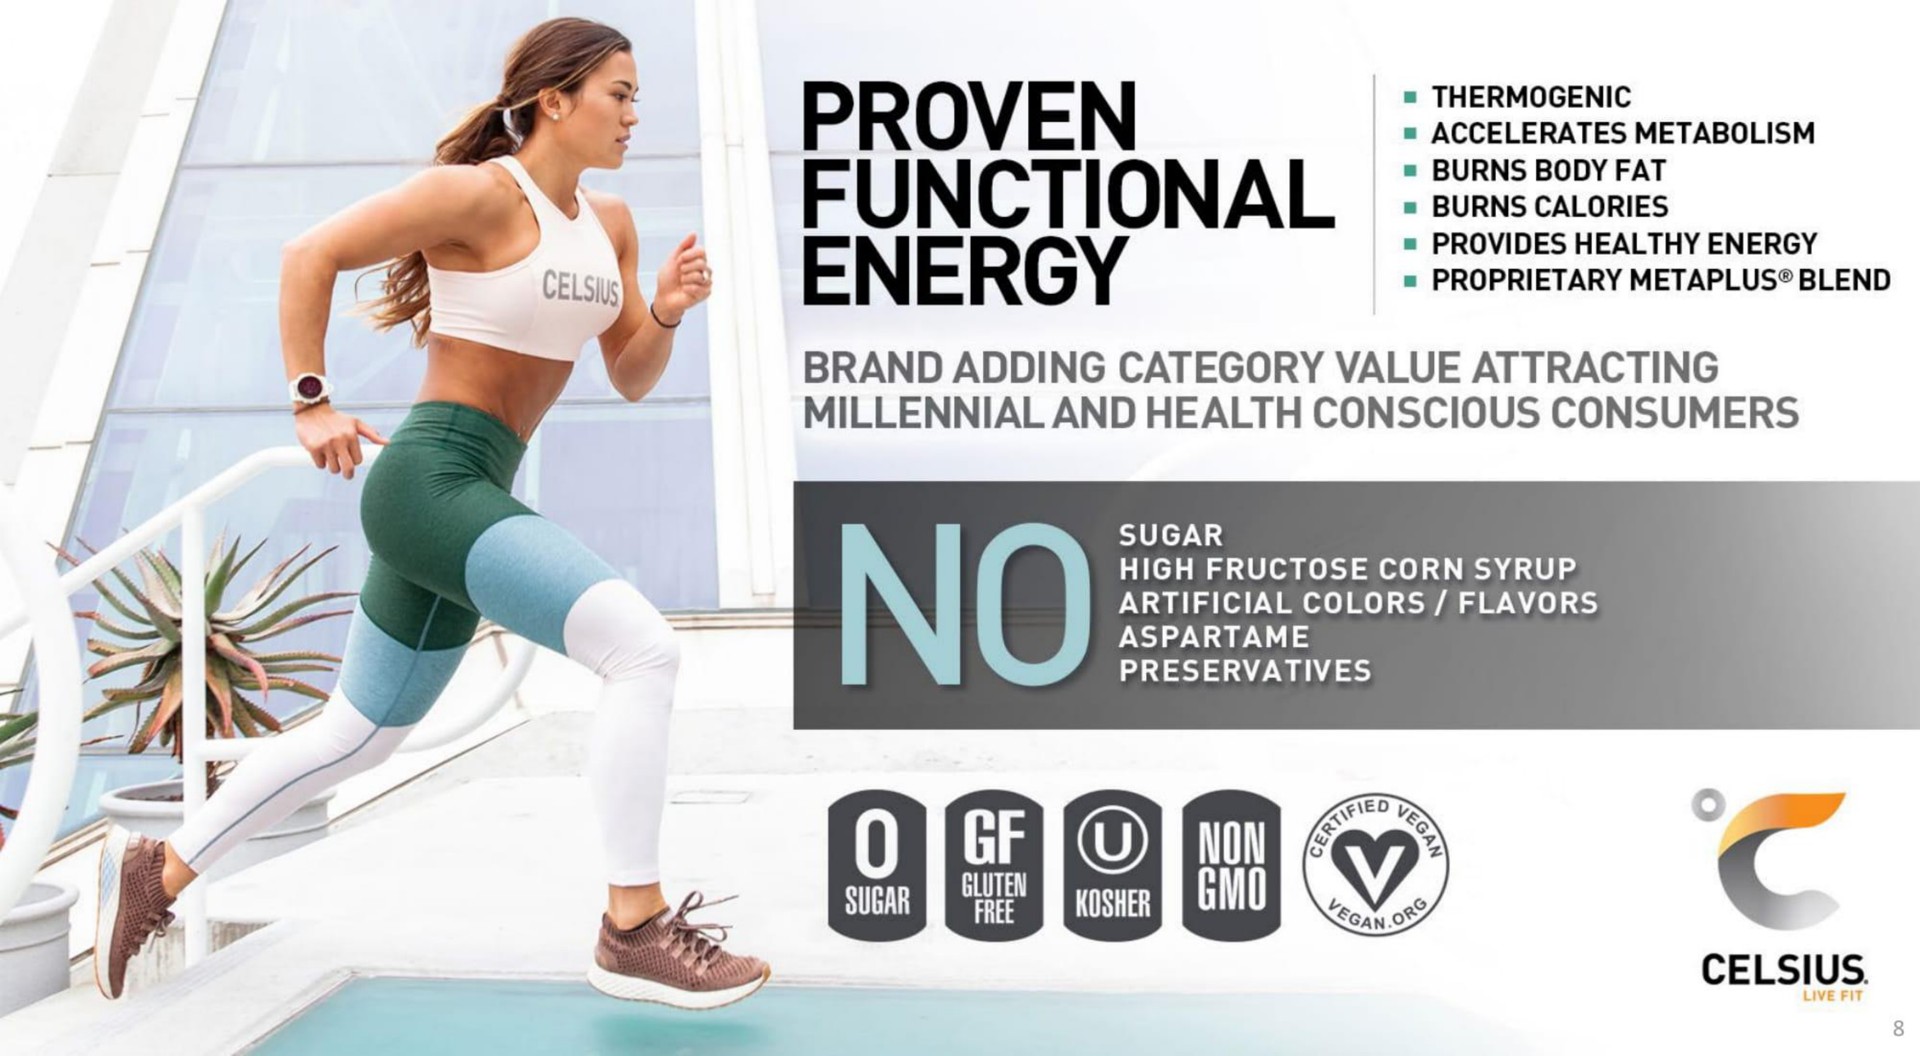 functional energy provides healthy energy proprietary blend brand adding category value attracting millennial and health conscious consumers | Celsius Holdings